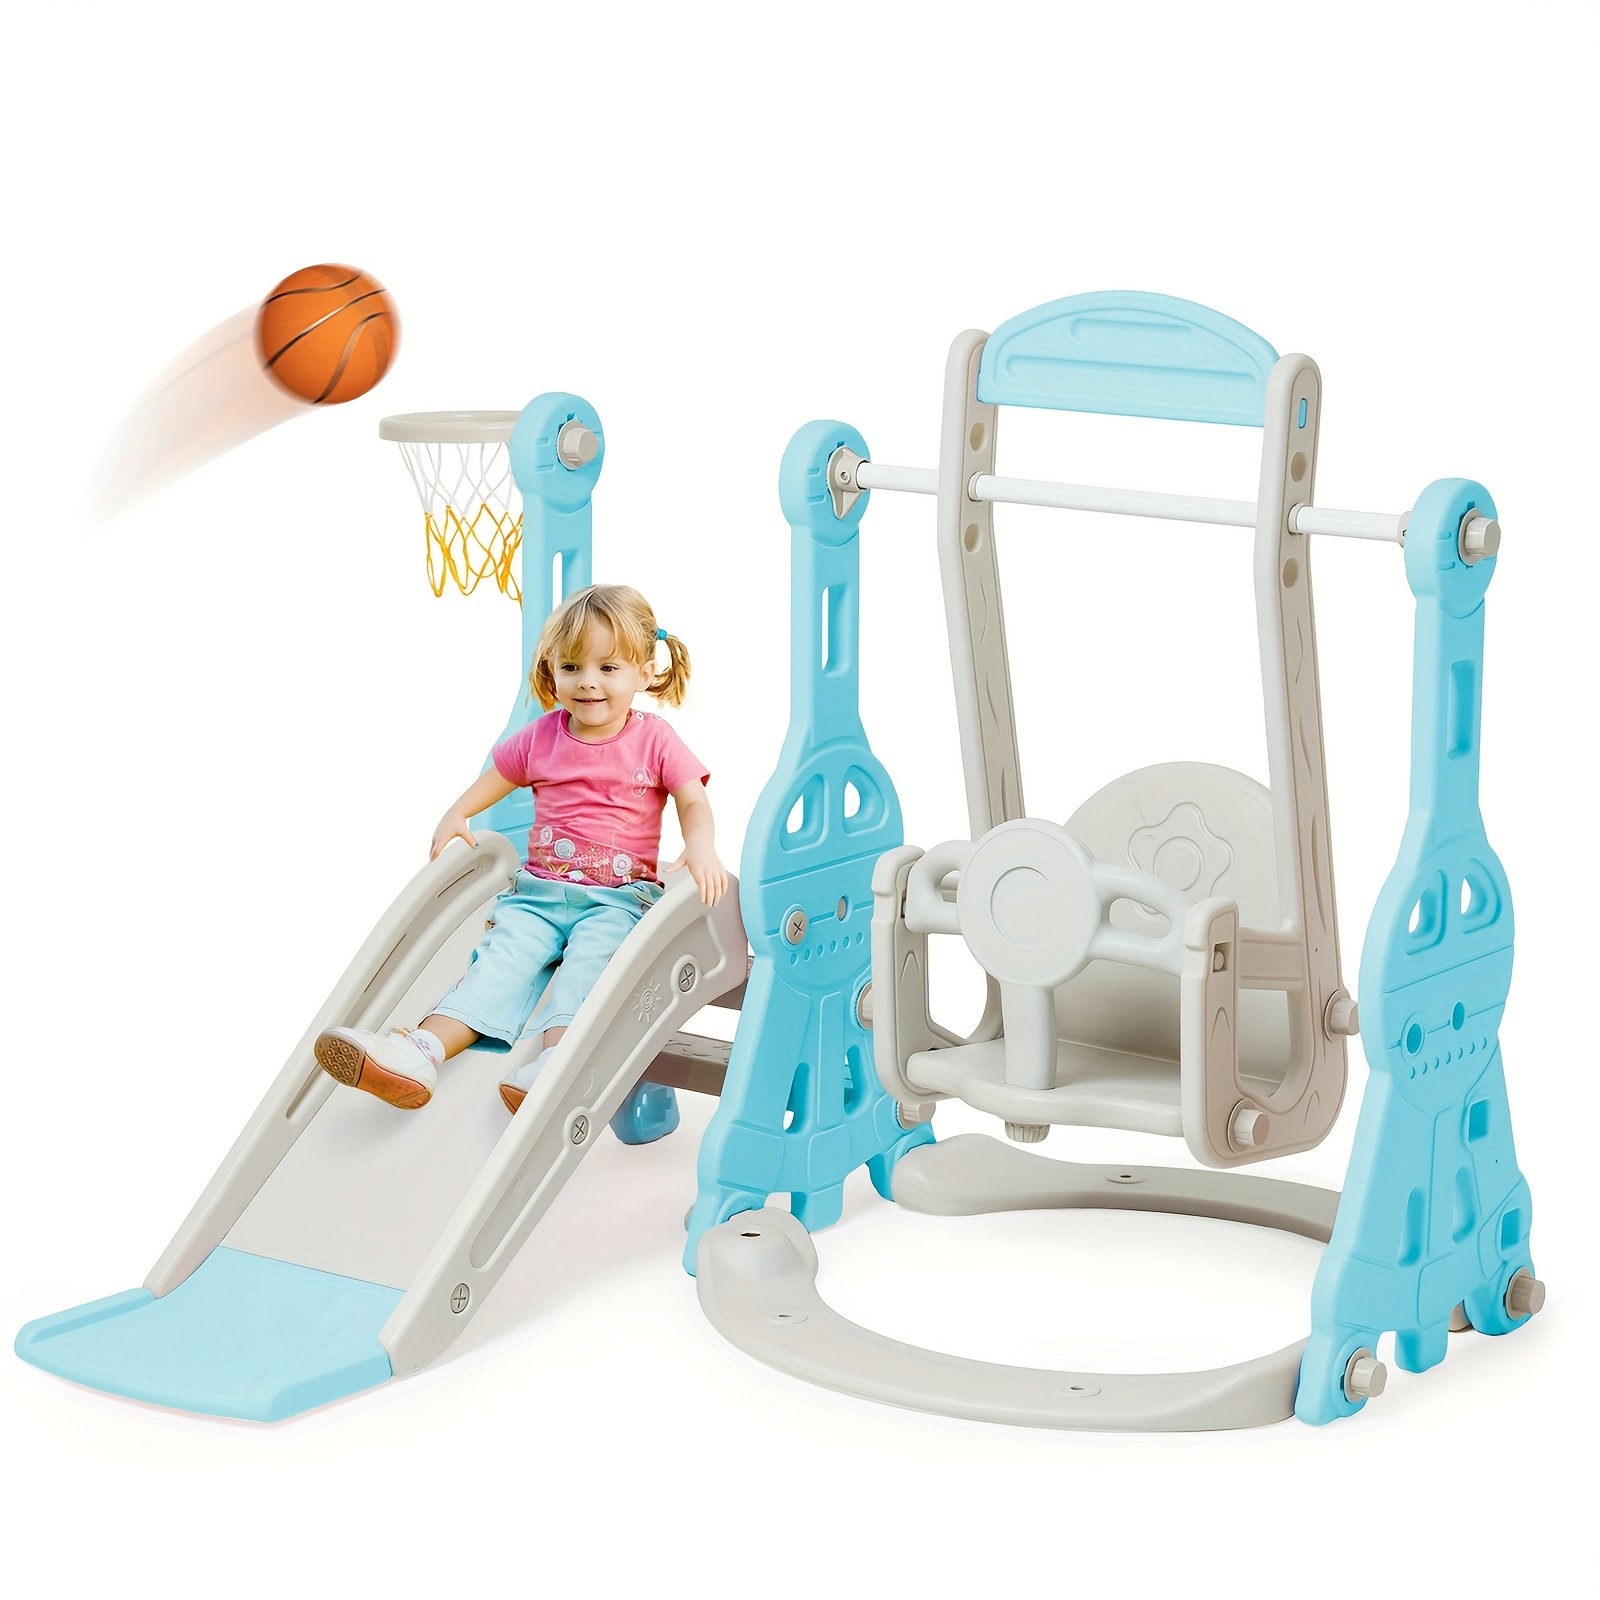 

Toddler Slide And Swing Set 4 In 1 Baby Slide Climber Playse With Swing Slide Climber And Basketball Kids Slide And Swing Set Indoor Outdoor Backyard Baby Playground Toys For Toddlers